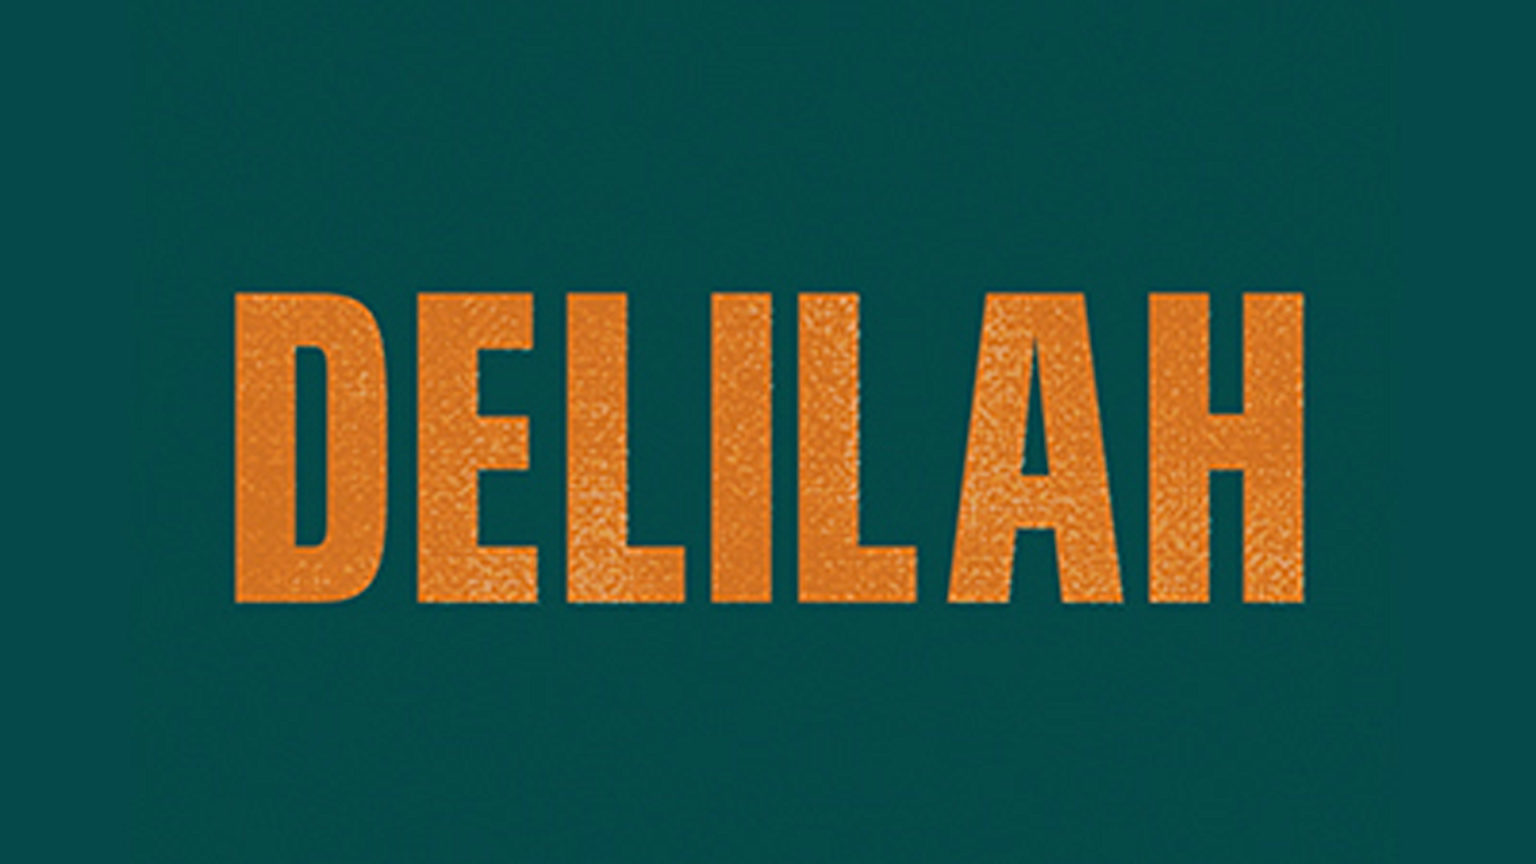 Delilah 14 Actors Cast in New Drama Series on OWN Cable Channel